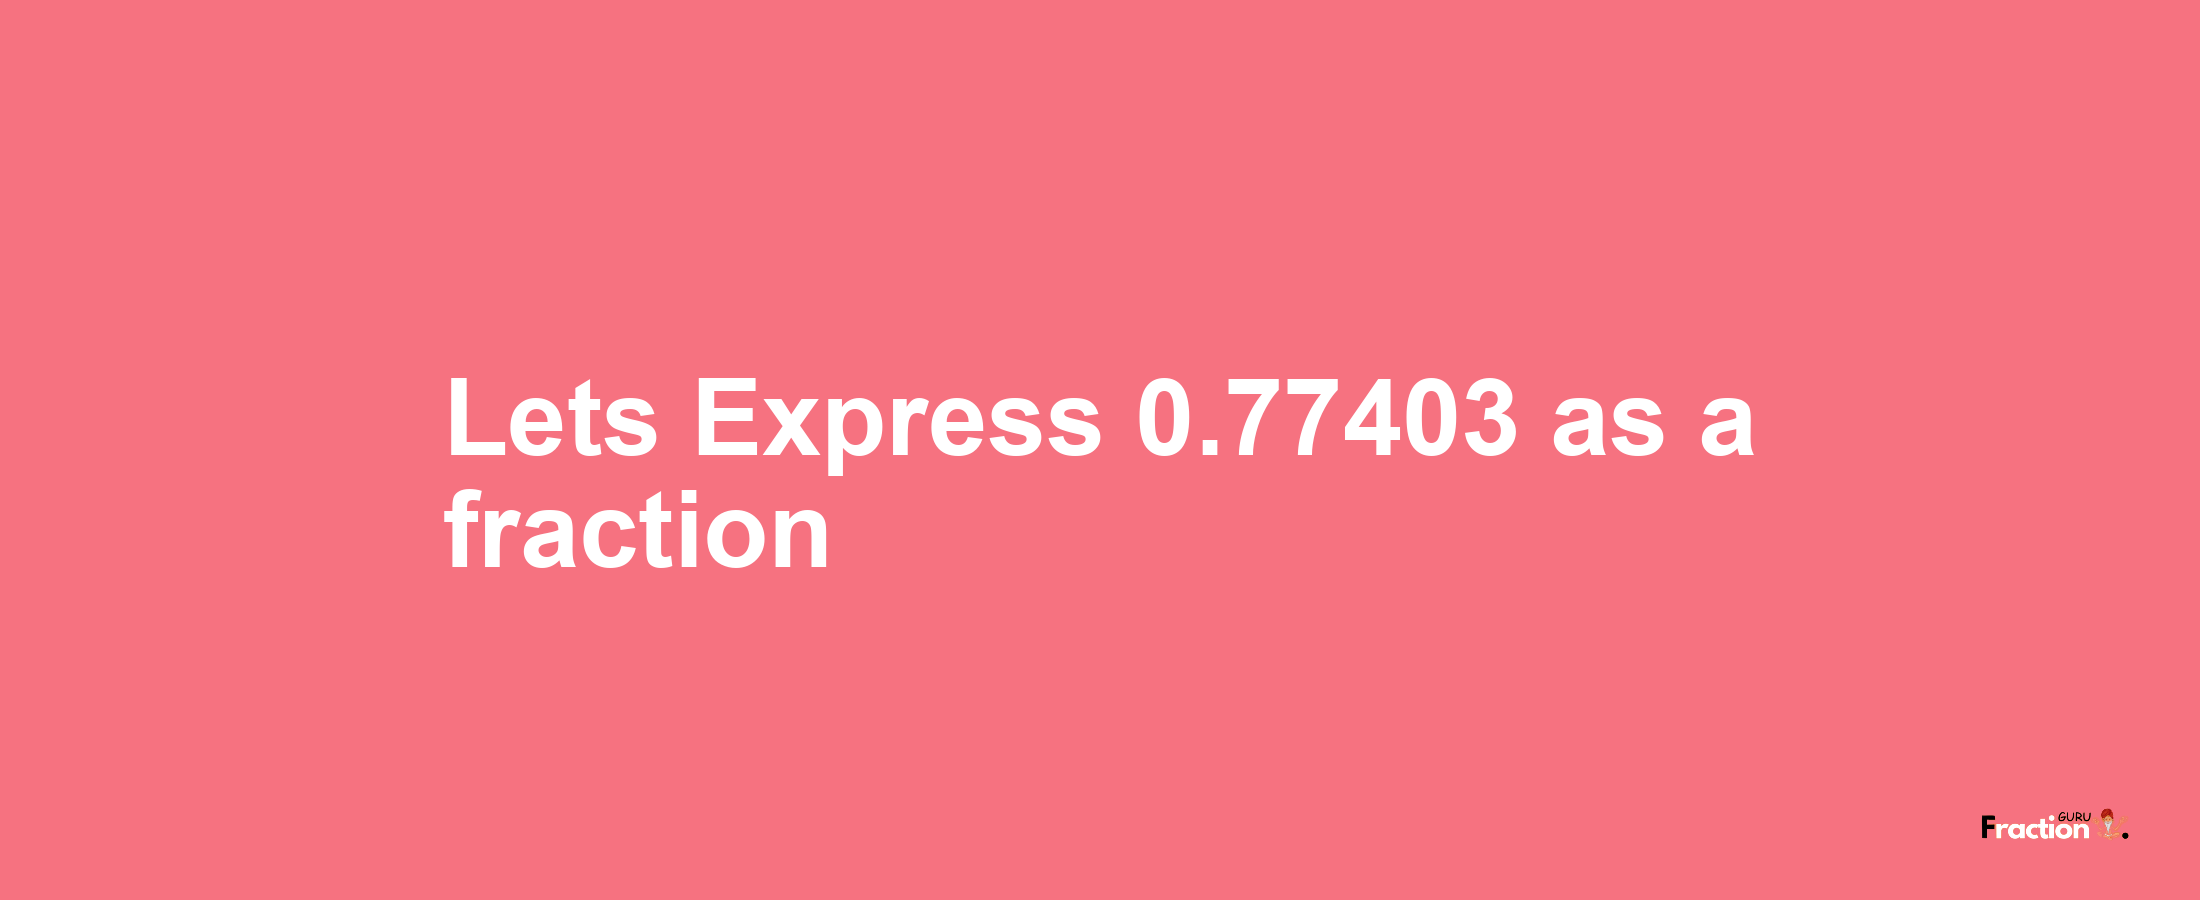 Lets Express 0.77403 as afraction